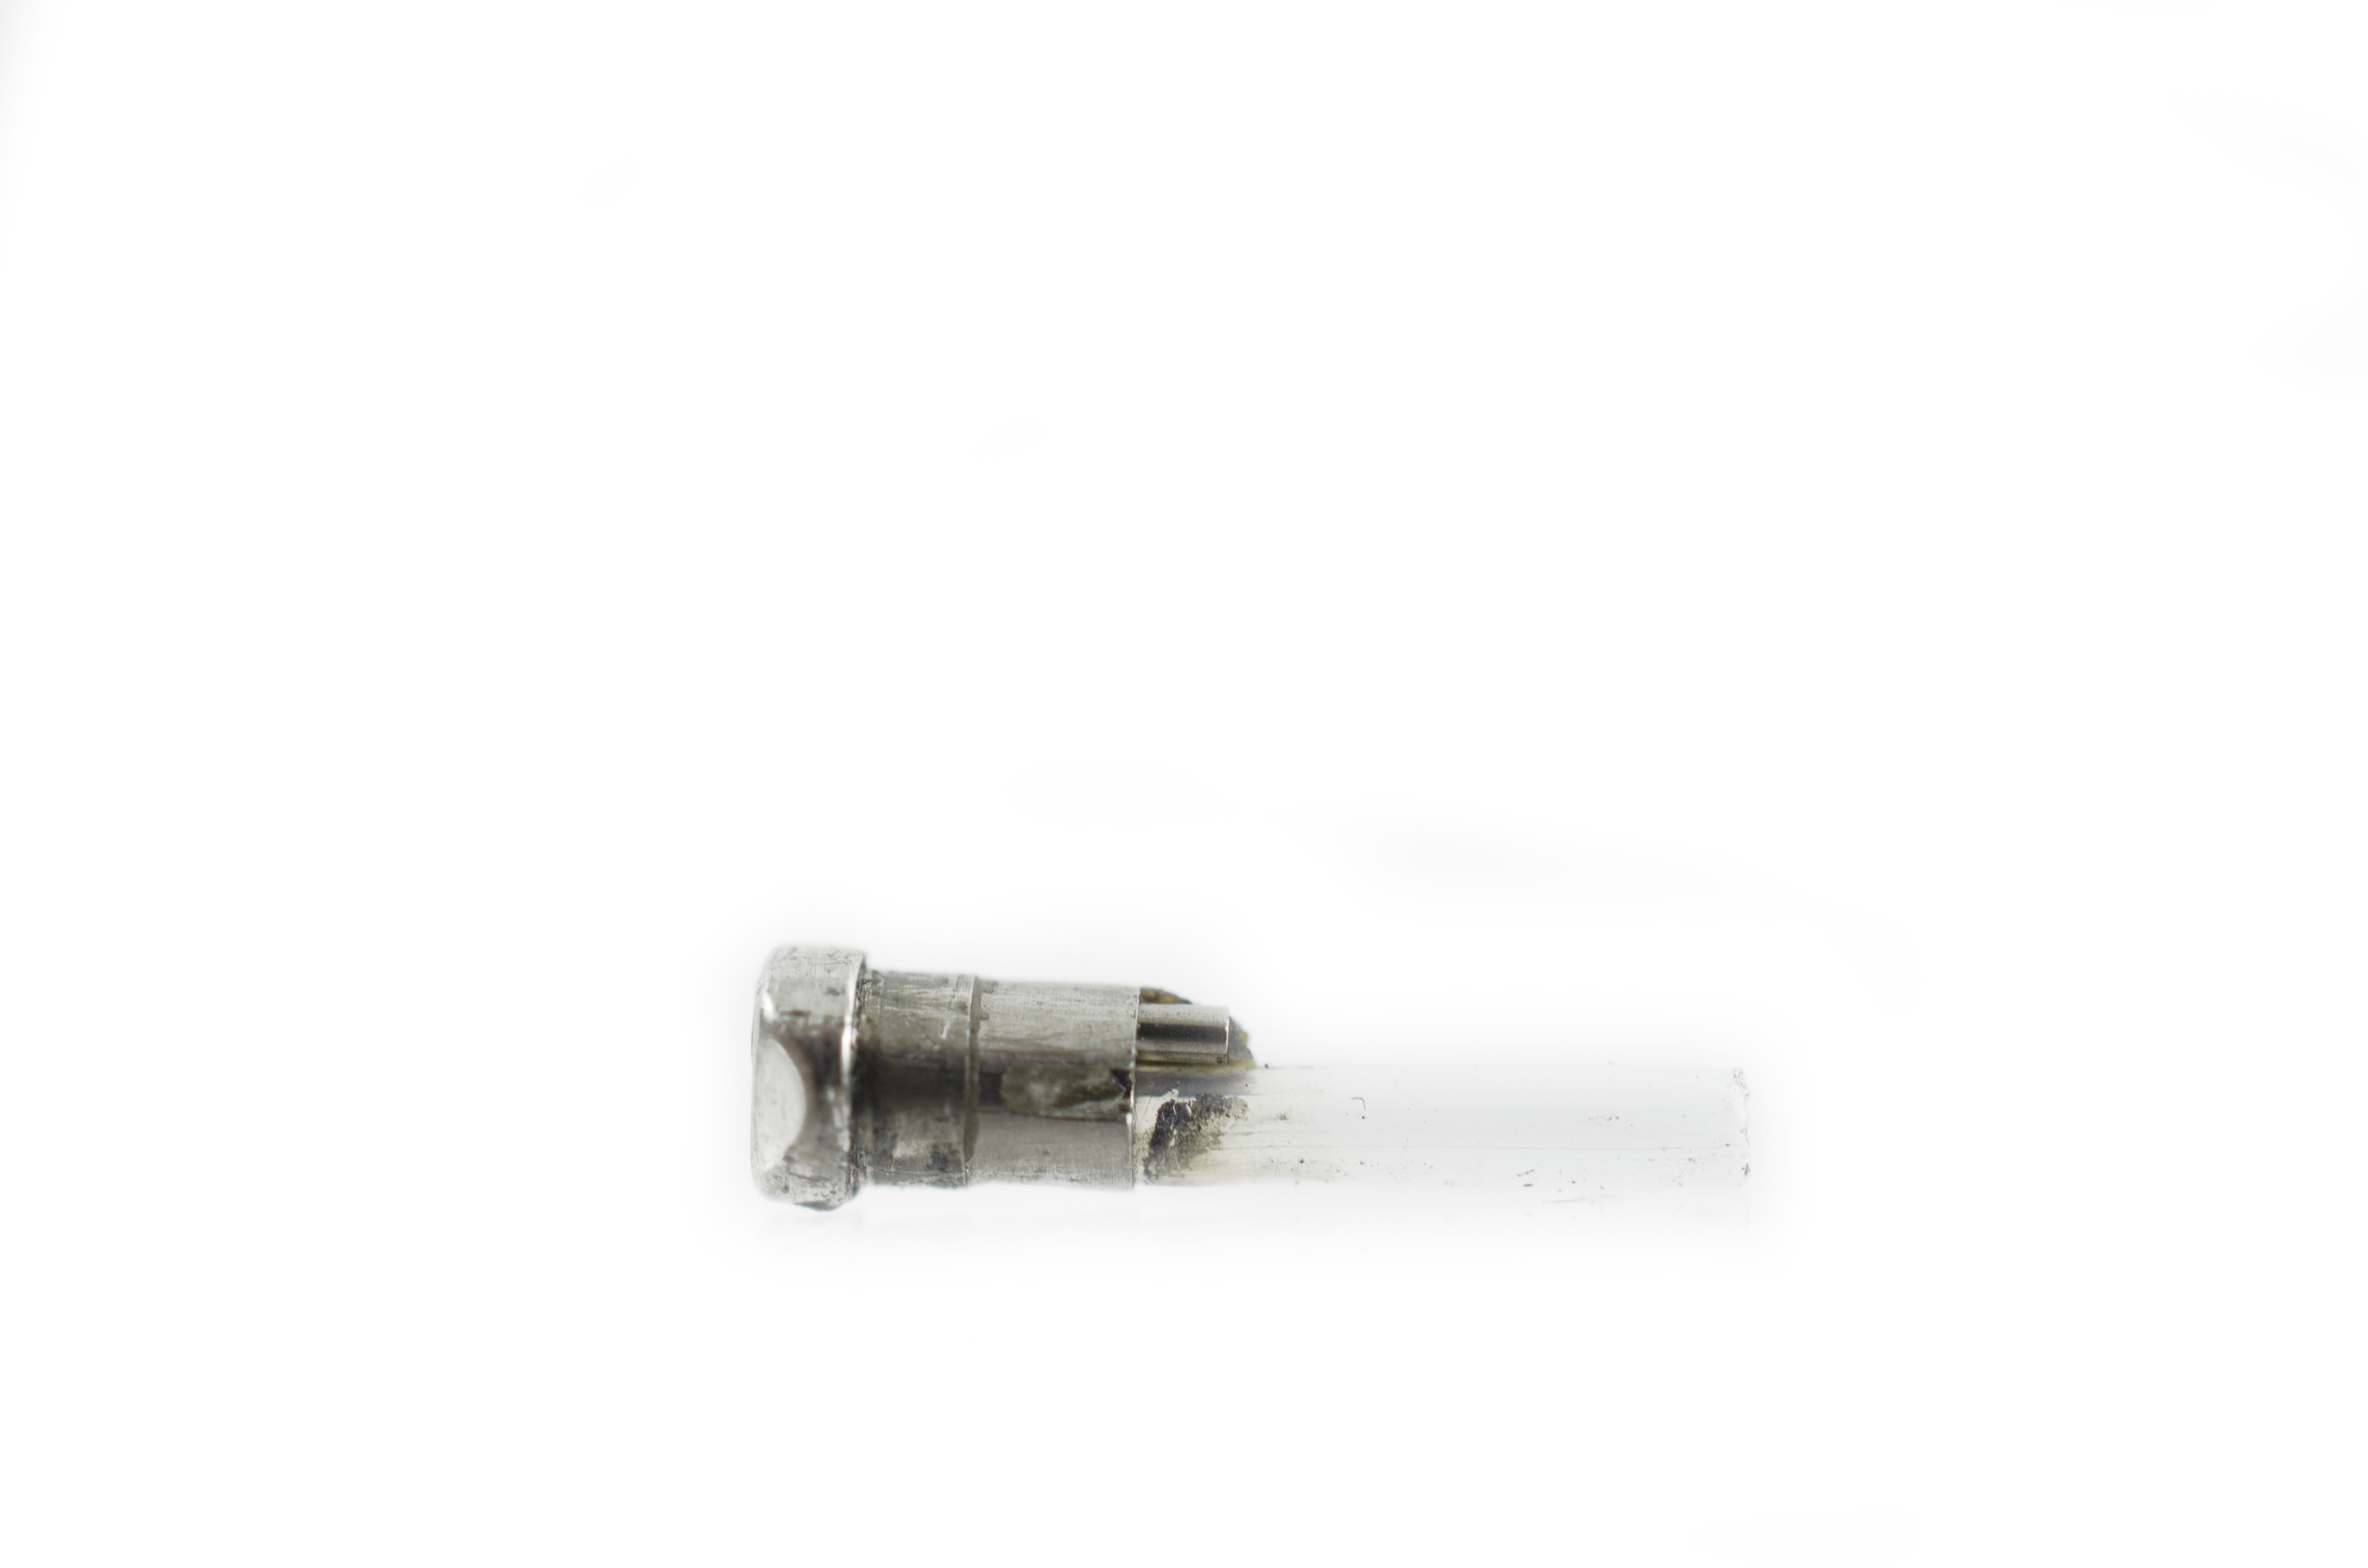 OEM Distal Tip with Lenses, C-Cover, and Objective Stack - HYF-P